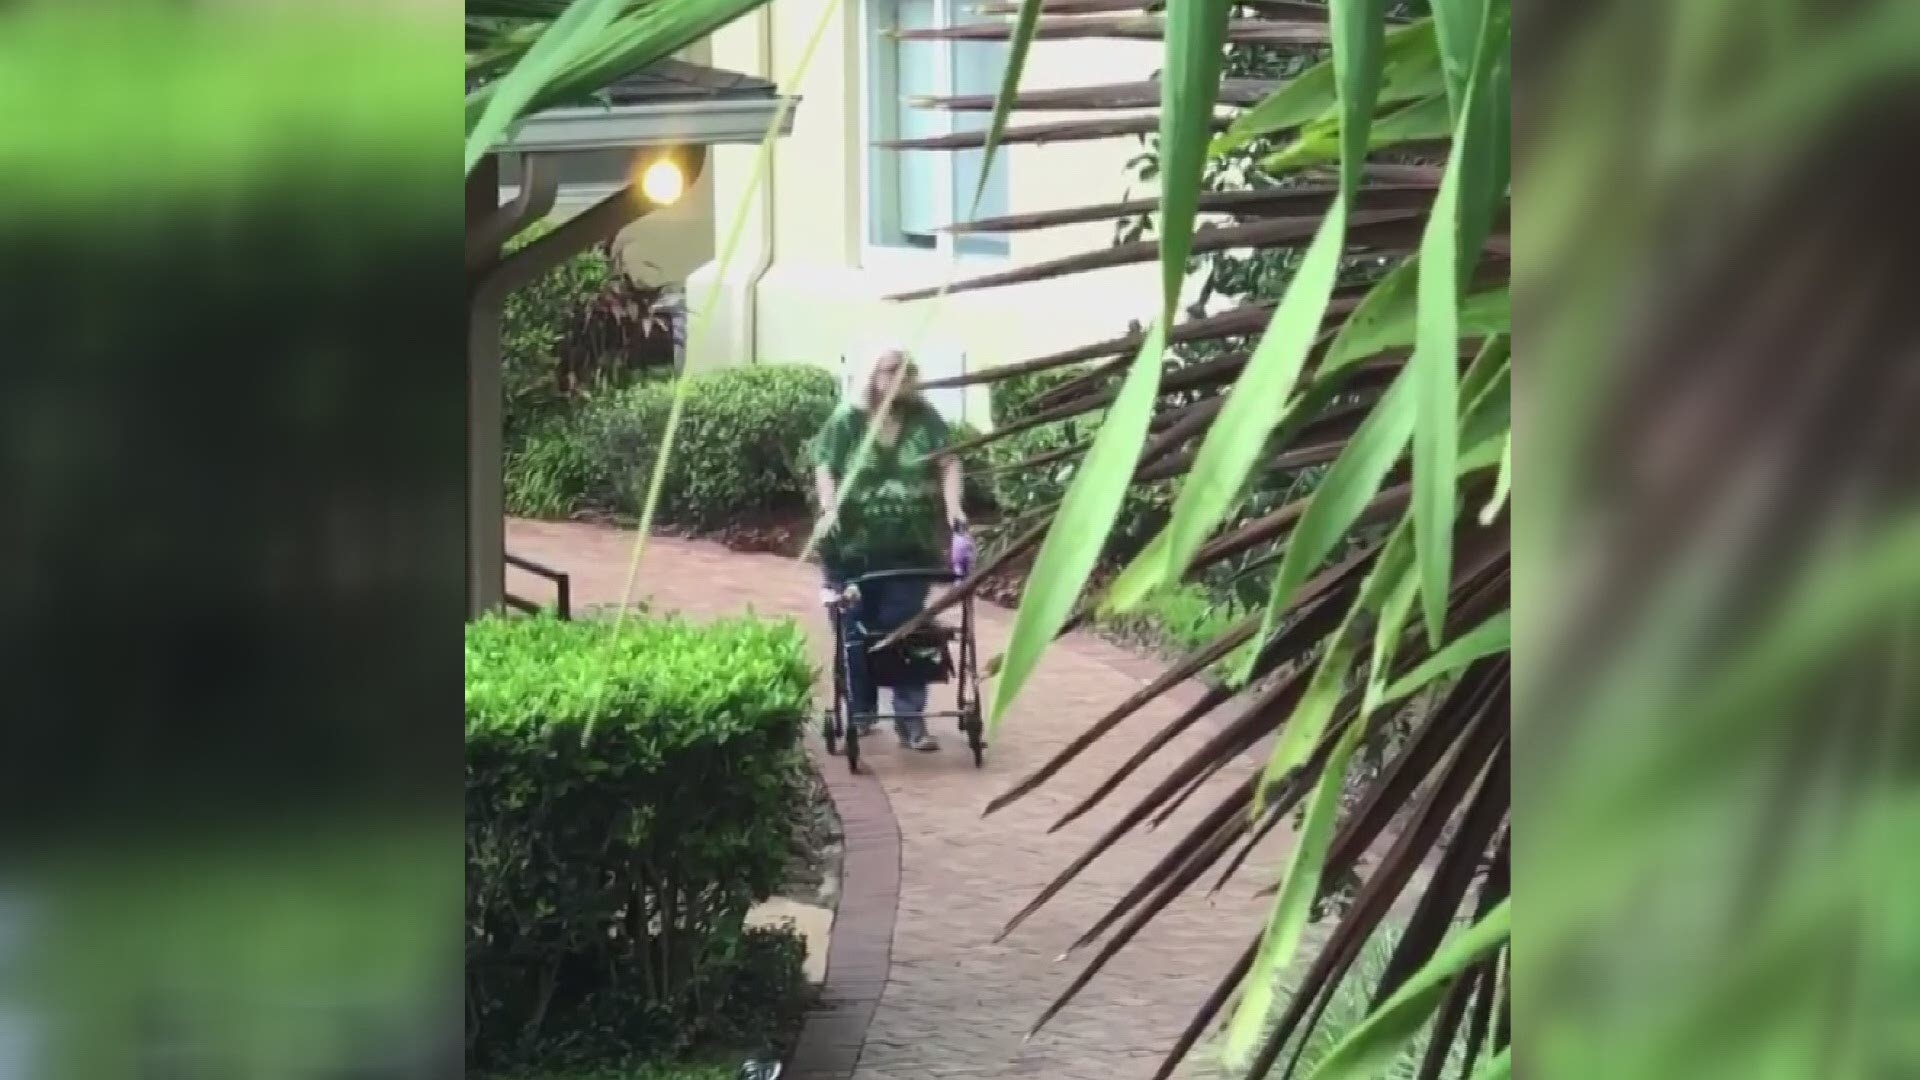 A Florida executive order stopped visitation at assisted living facilities and nursing homes across the state.